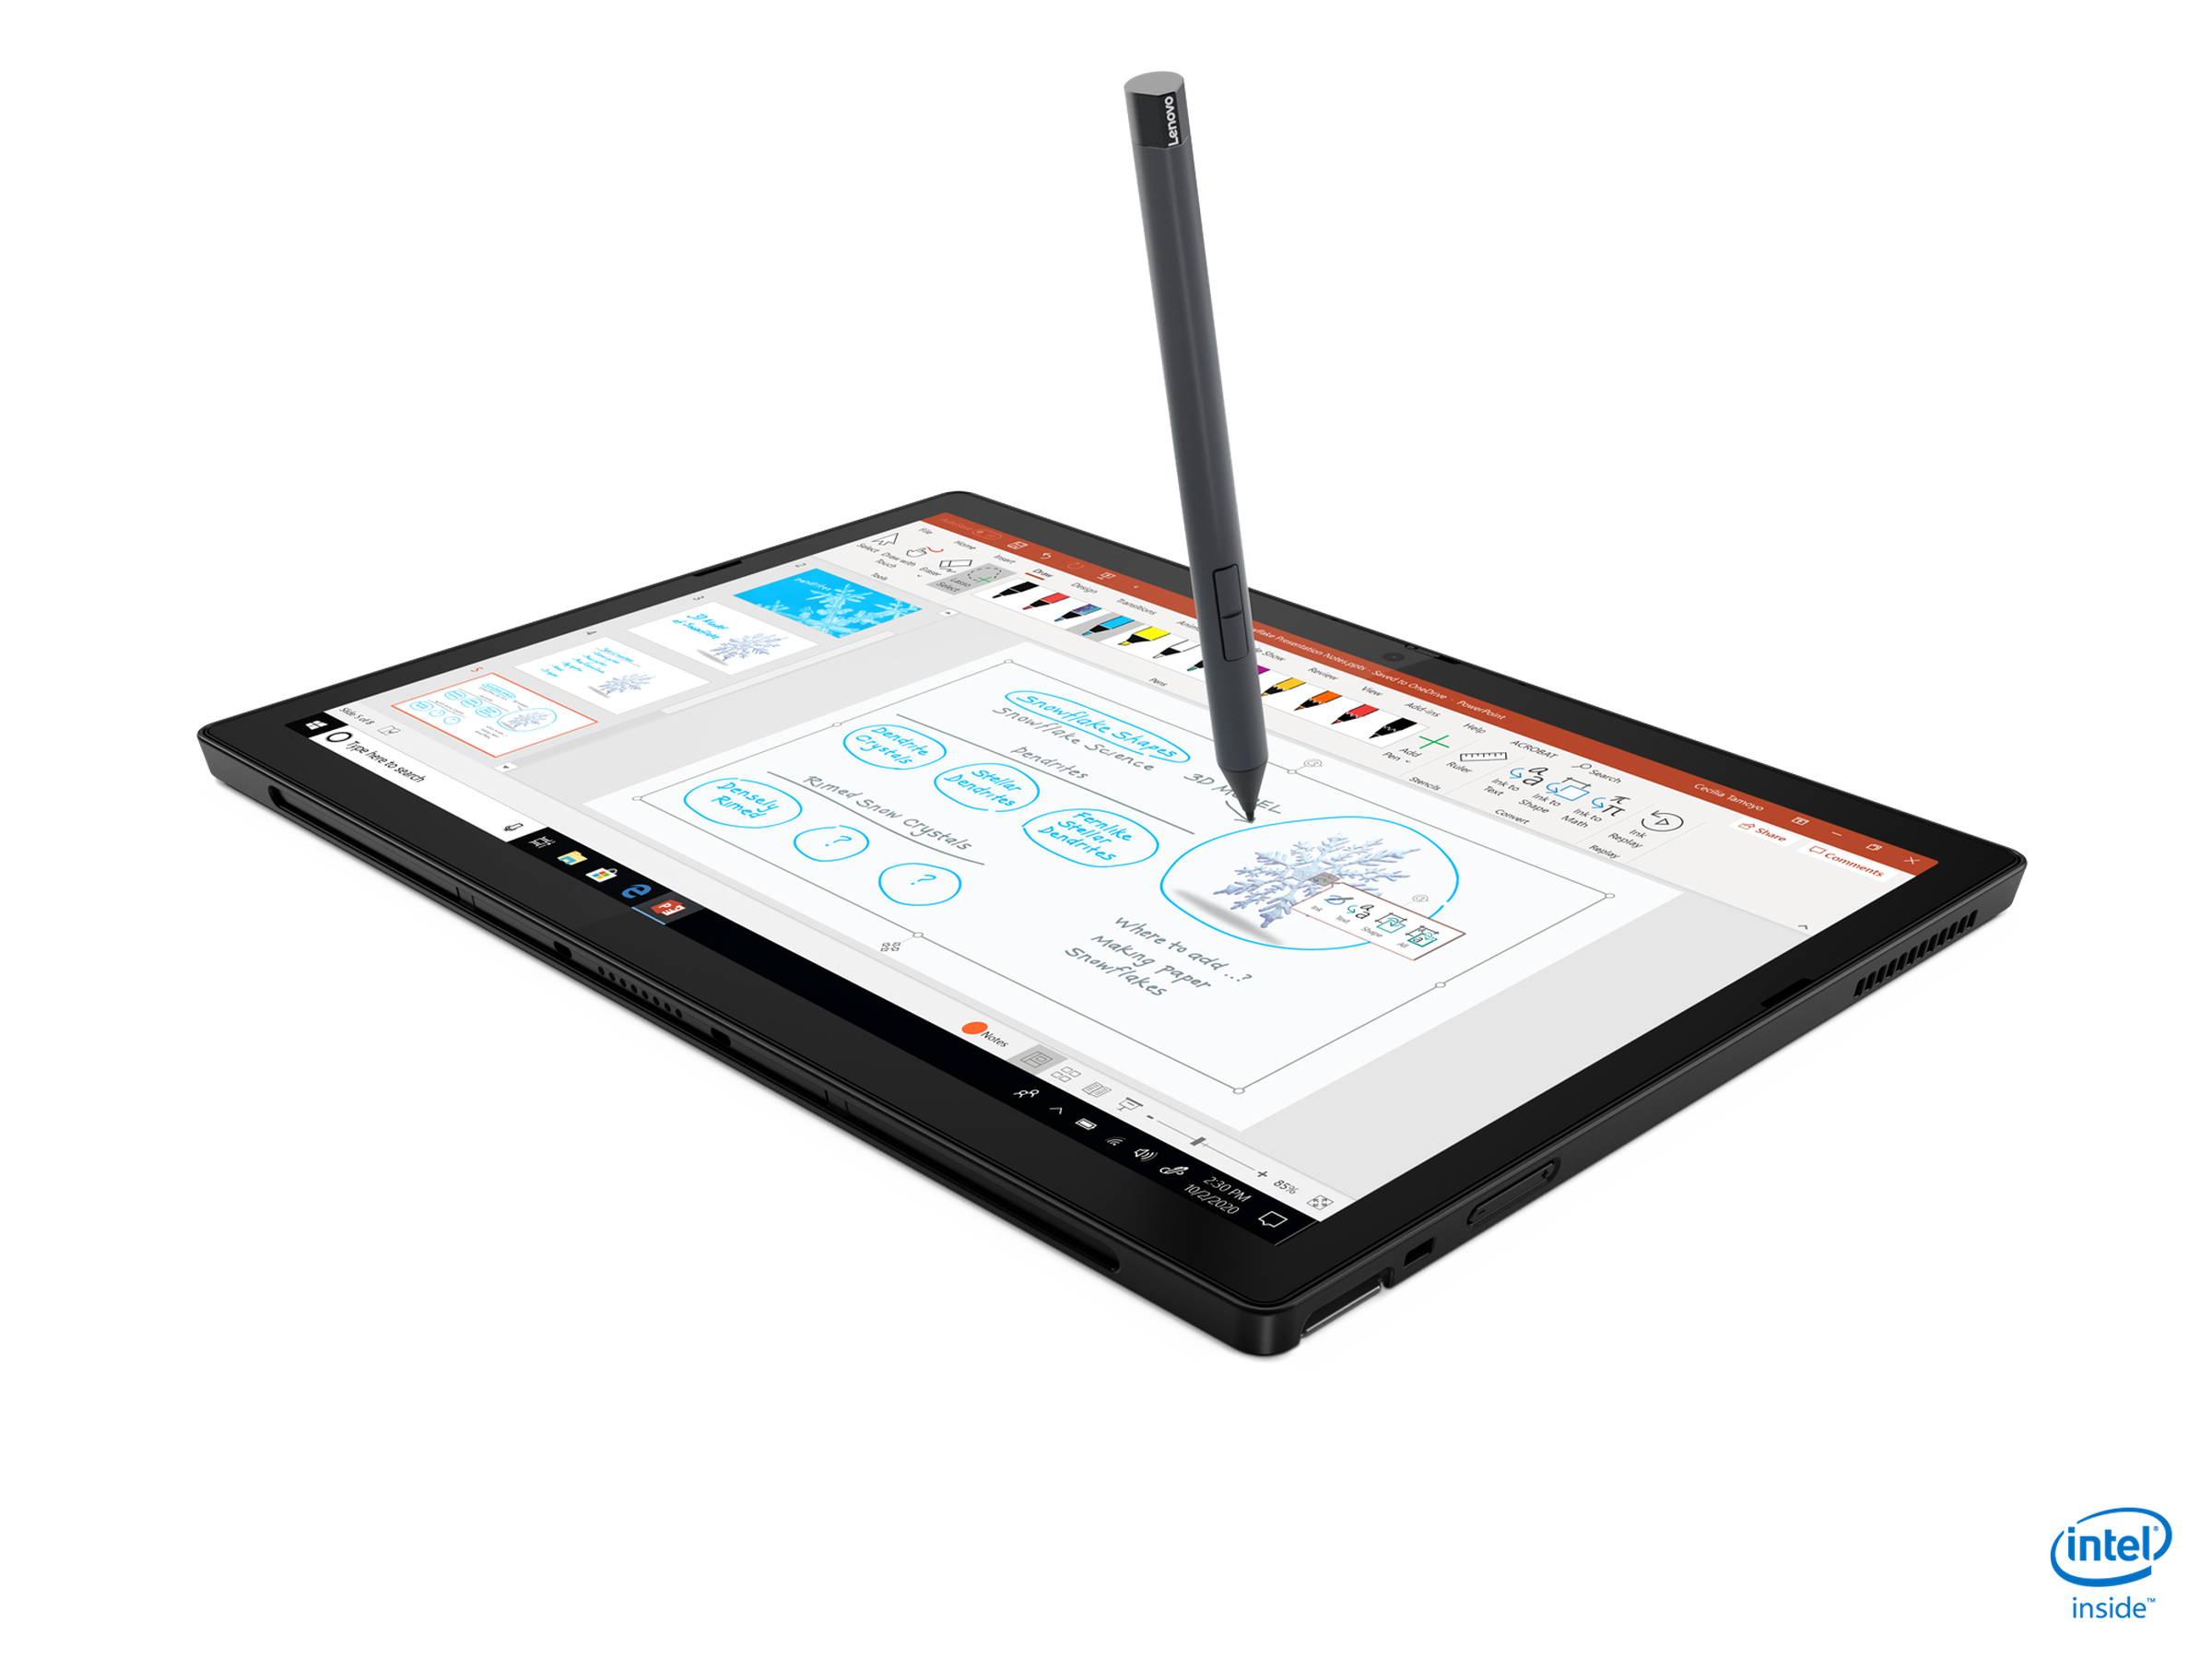 The ThinkPad X12 Detatchable in tablet mode, being written on with a stylus.